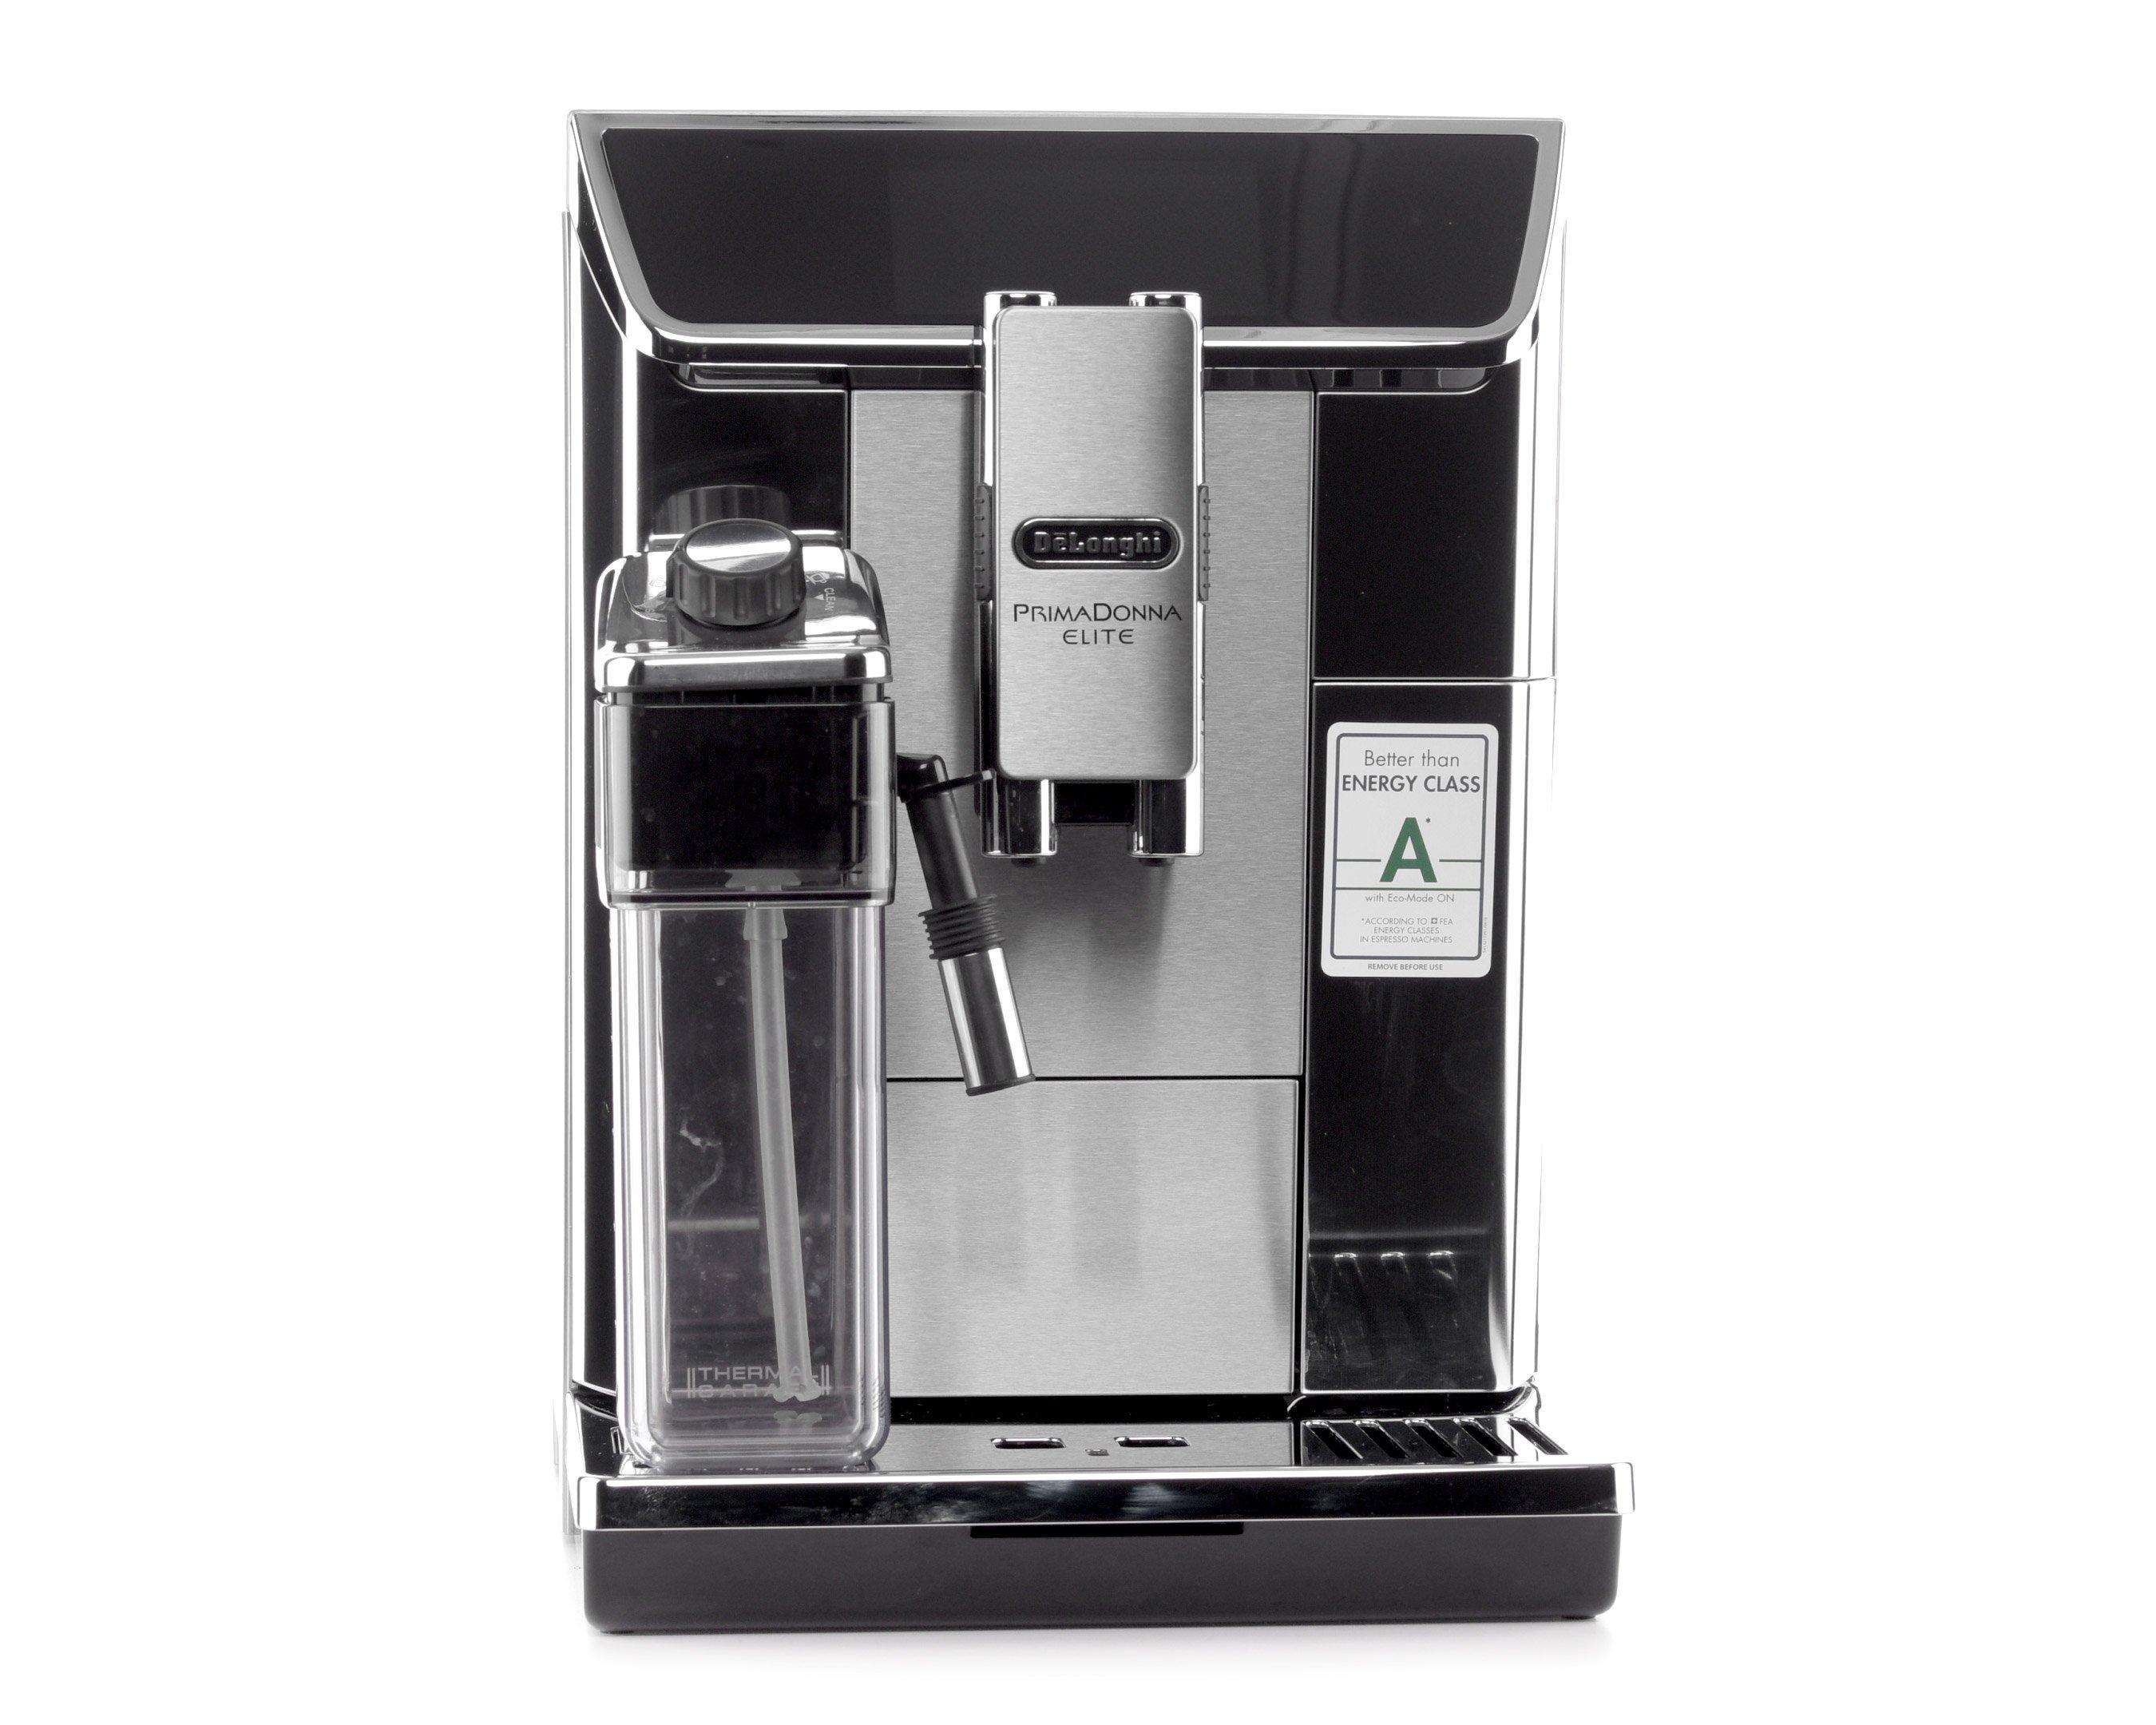 Delonghi Coffee Maker, 1450W, Machine connected to the innovative